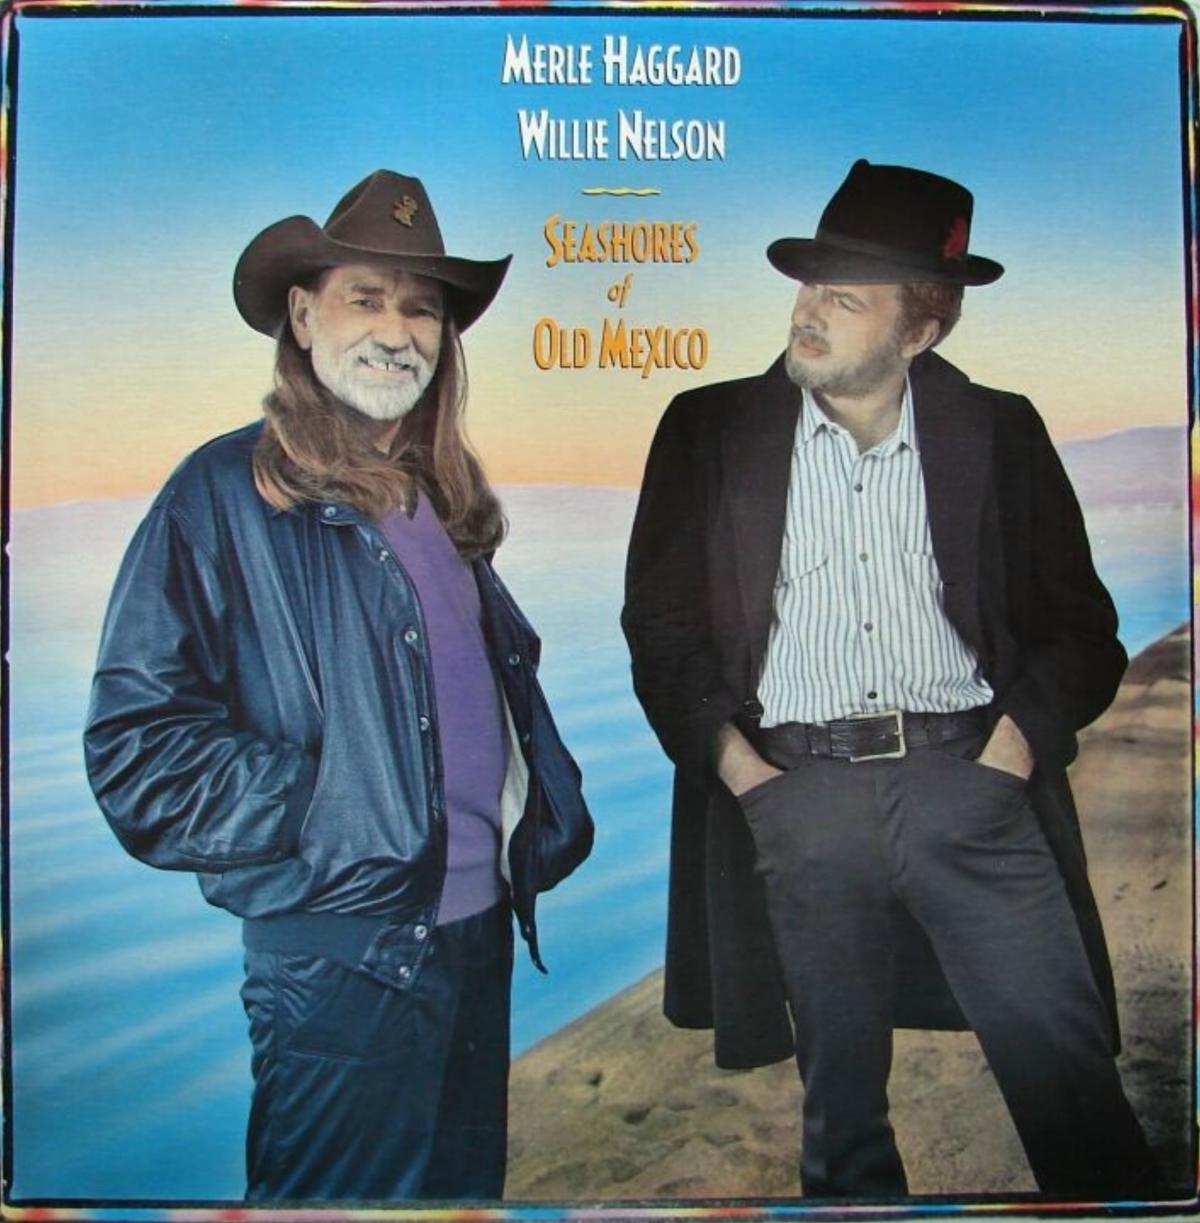 Merle Haggard's 1987 Album The Seashores Of Old Mexico with Willie Nelson